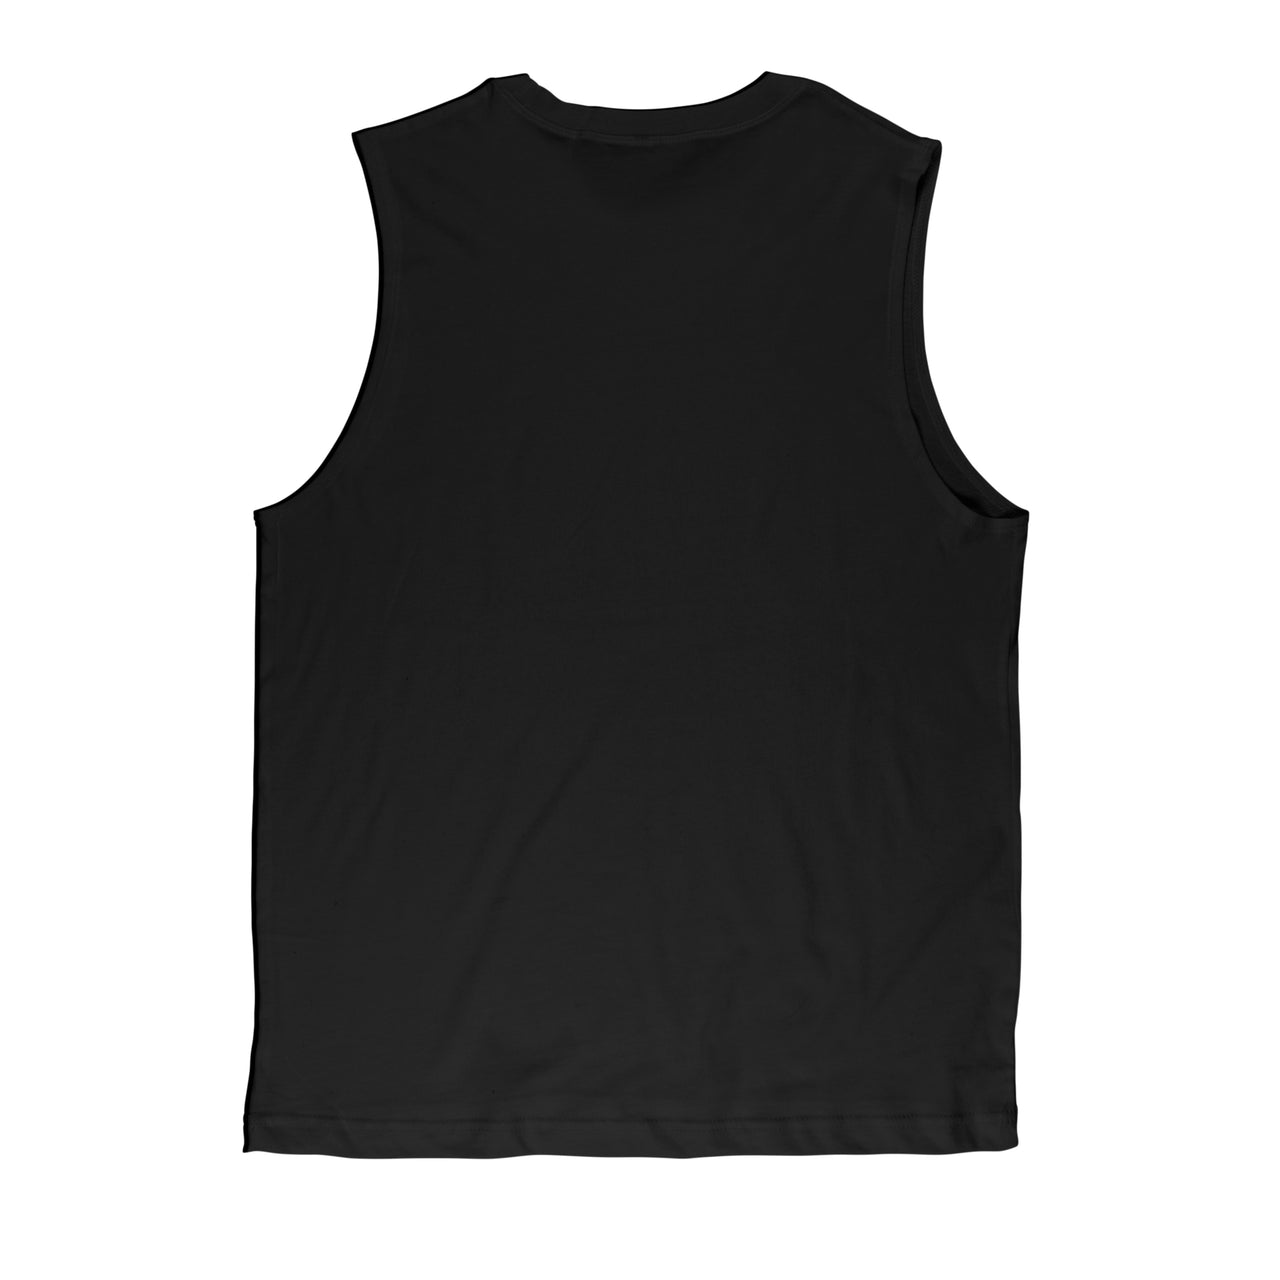 No Spoons Club Masculine Muscle Tank